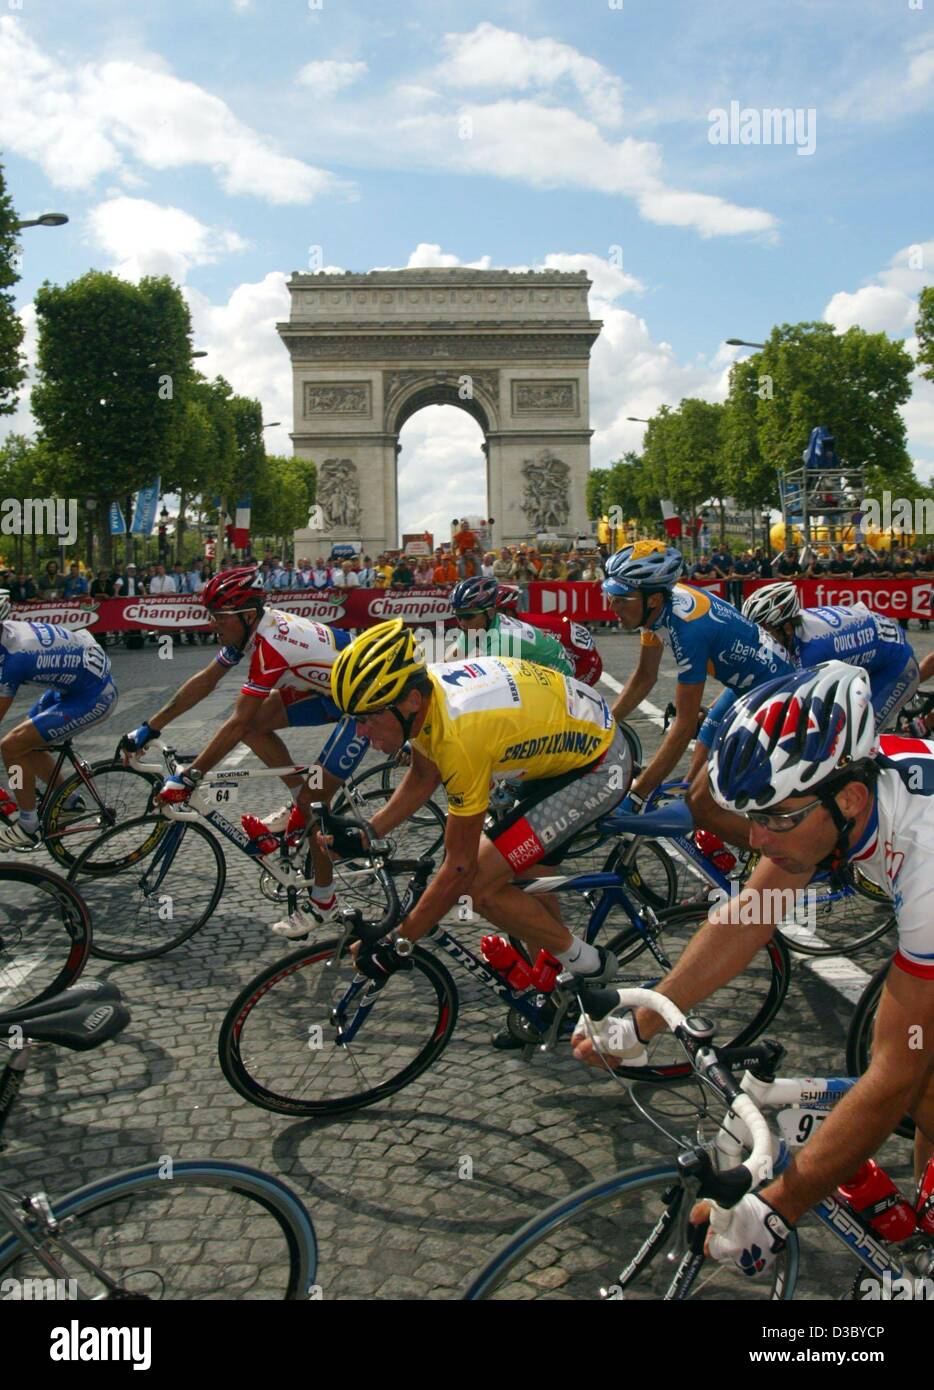 (dpa) - US Postal-Berry Floor's Lance Armstrong (C) from the US, wears the overall leader's yellow jersey and rides on his bicycle with other cyclists past the Arc de Triumph along the Champs-Elysees towards the finishing line during the final stage of the Tour de France cycling race in Paris, Franc Stock Photo